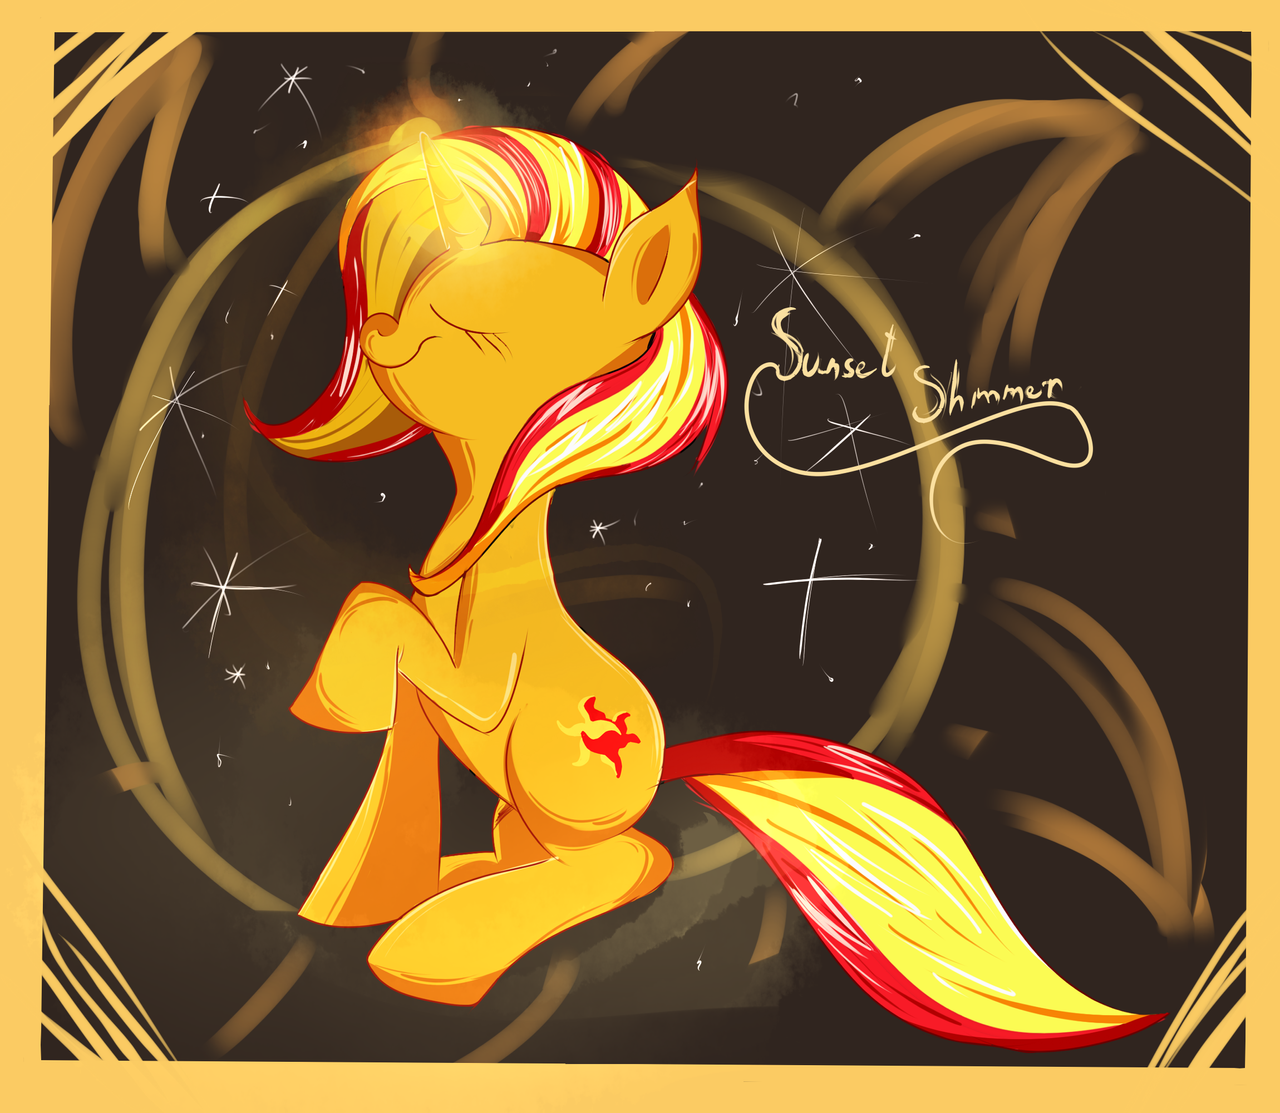 [Bild: sunset_shimmer_by_vanille913-d5xi27a.png]